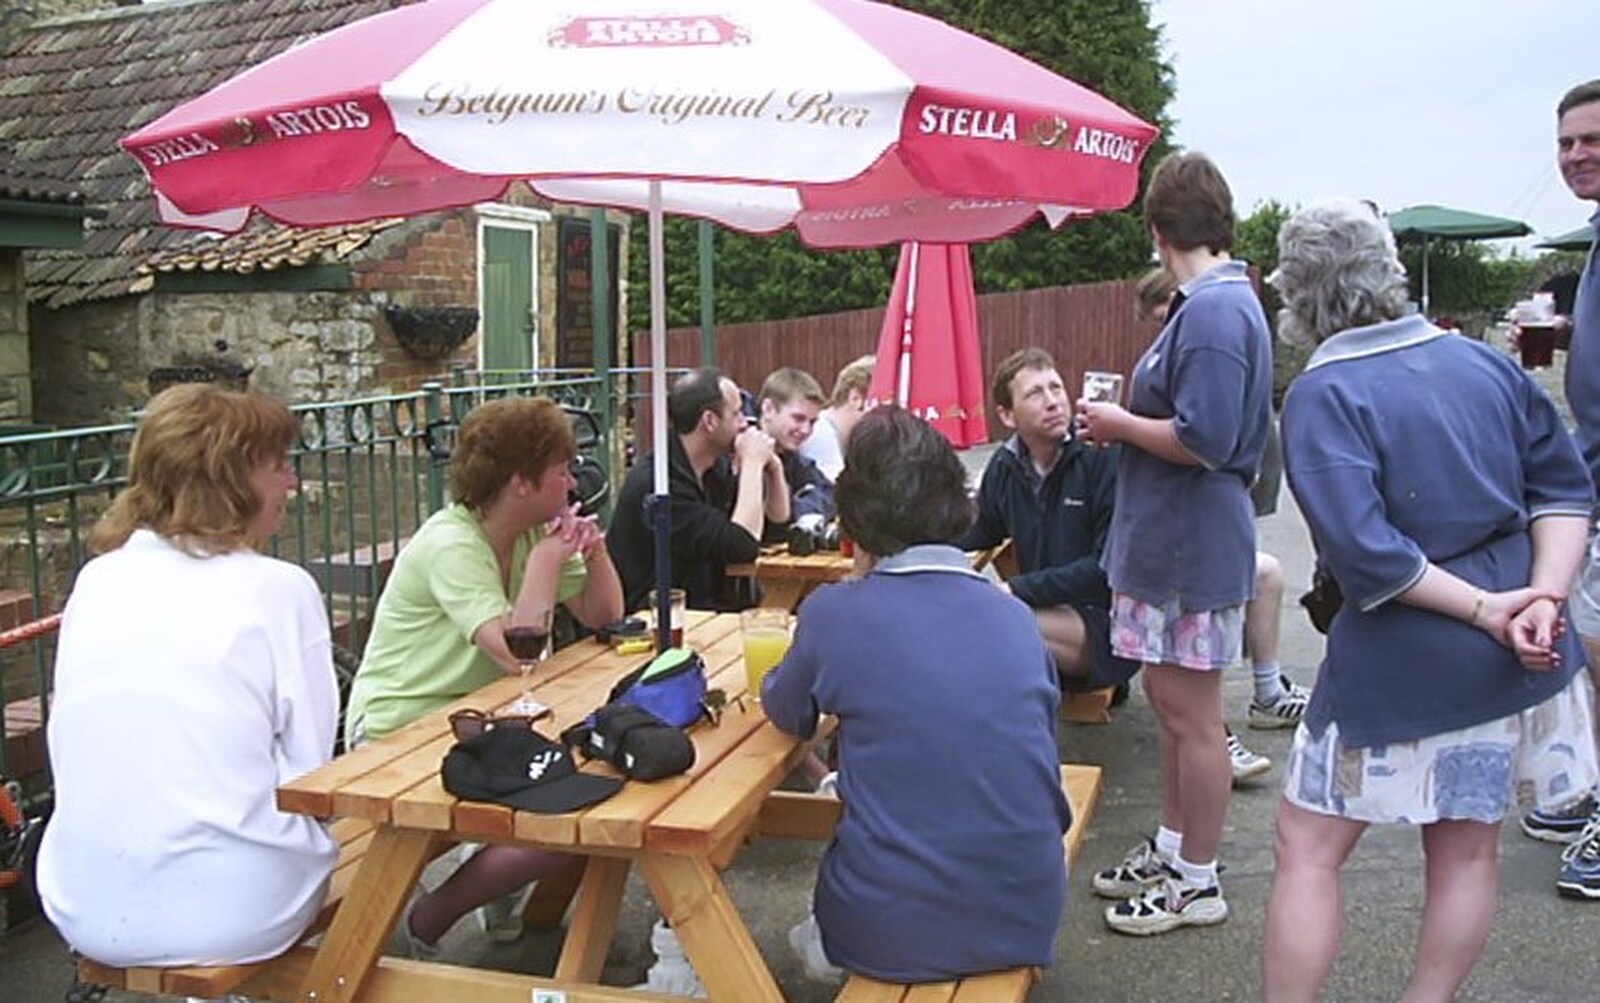 More club mingling from The BSCC Annual Bike Ride, Marquess of Exeter, Oakham, Rutland - 12th May 2001